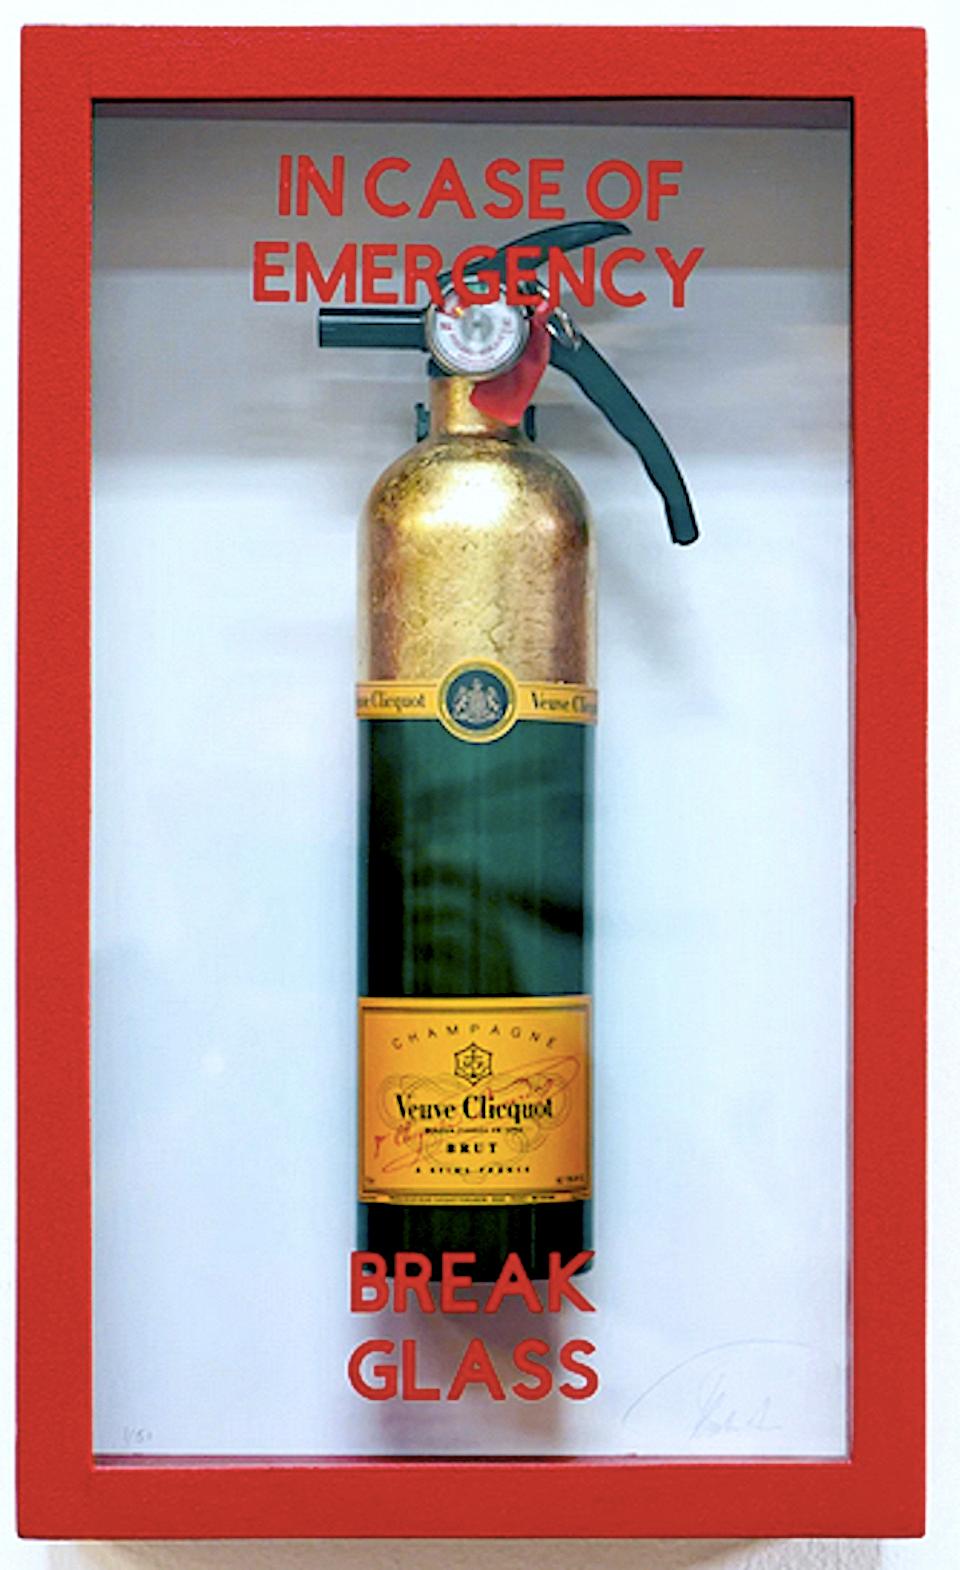 "In Case Of Emergency - Compact Moet  Fire Extinguisher" - Mixed Media Art by Plastic Jesus